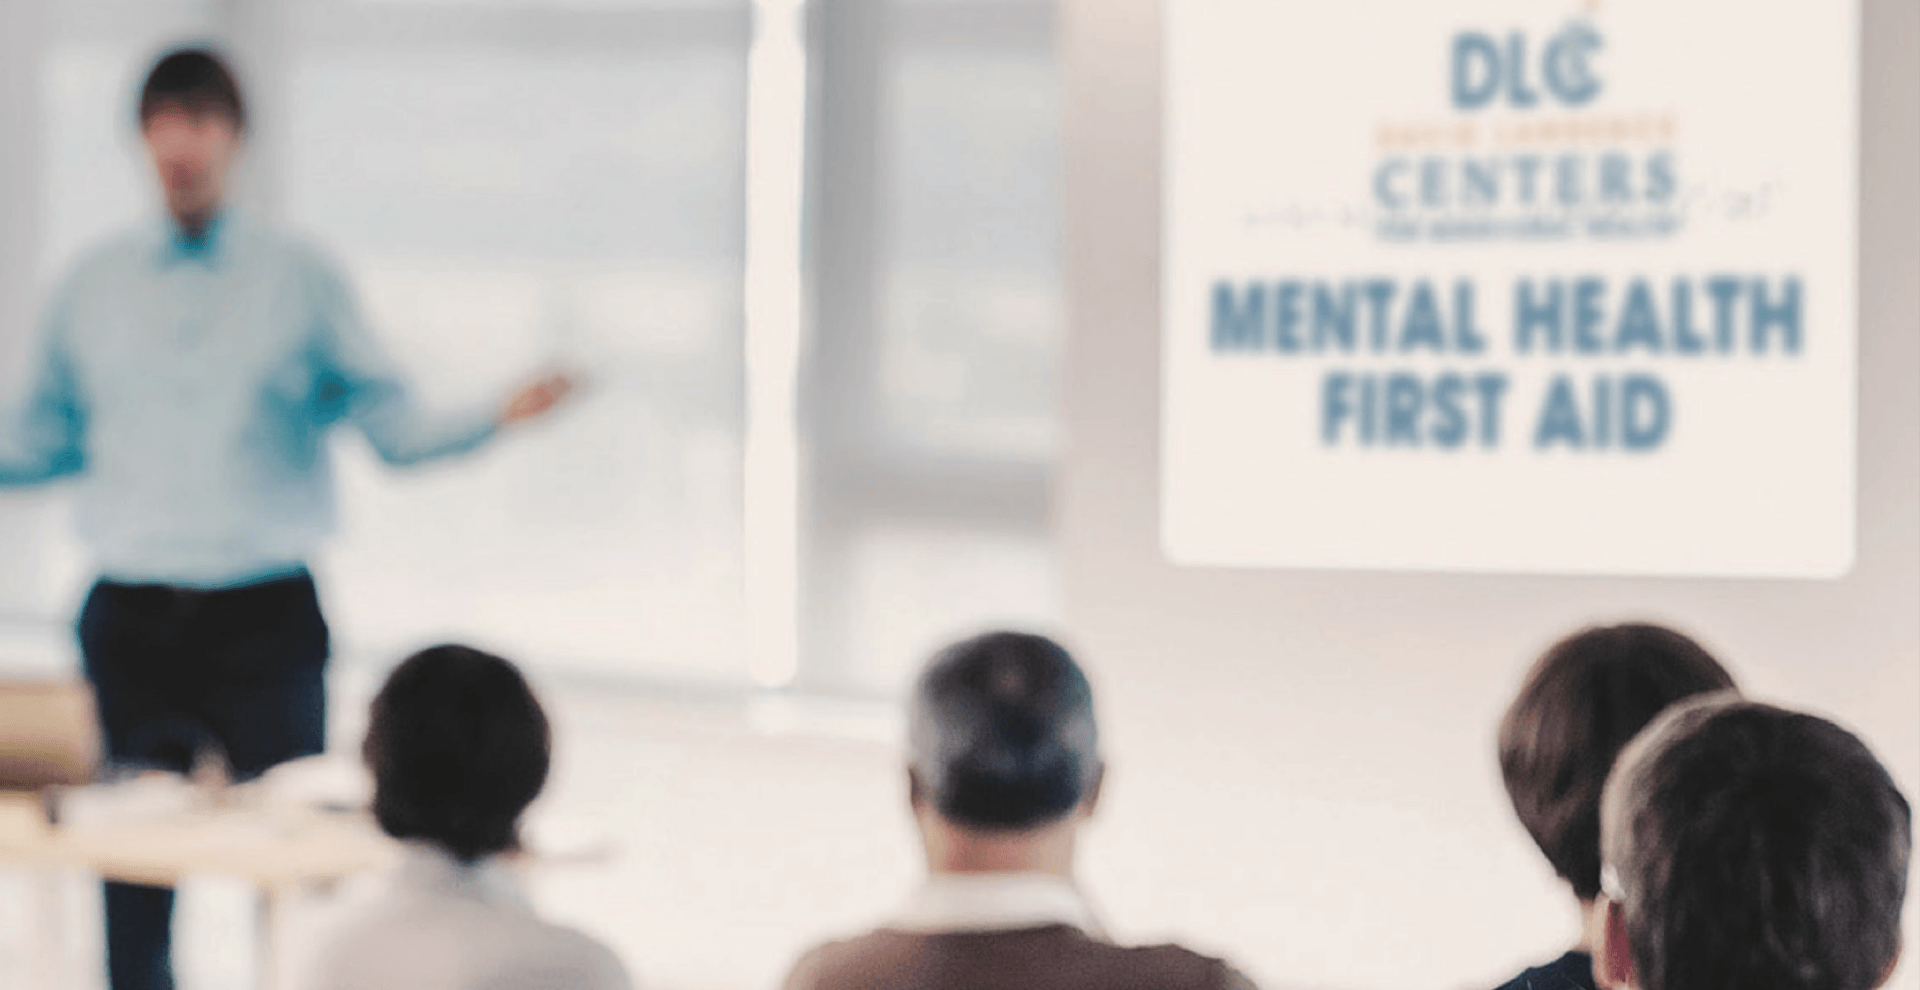 July 26th Adult Mental Health First Aid Training (In-Person Instructor-Led Session)